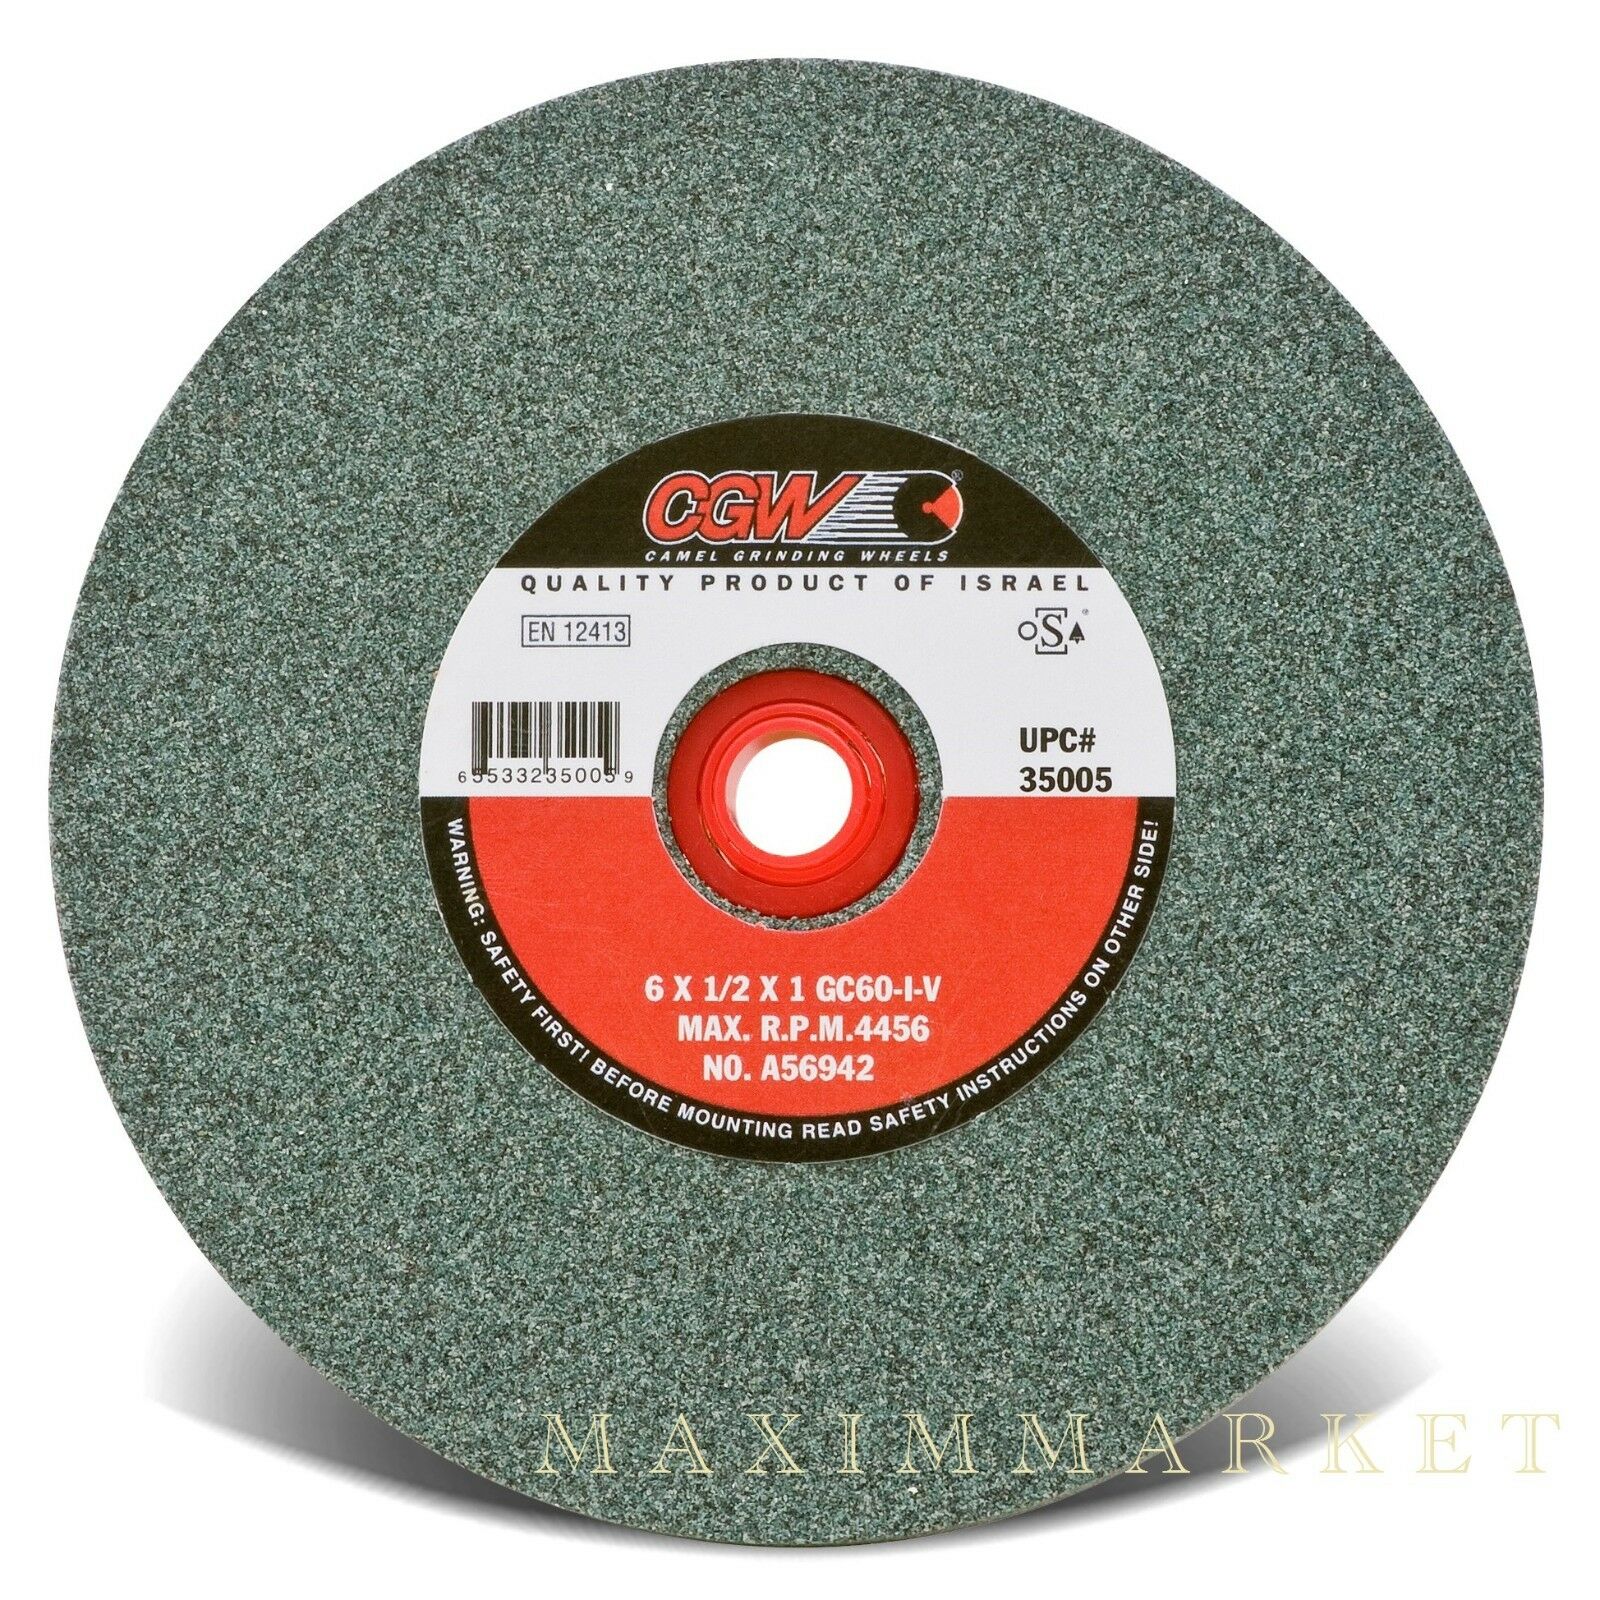 Cgw 6"x1/2"x1" Green Silicon Carbide Straight Grinding Wheel Grit-60, 80 Or 100